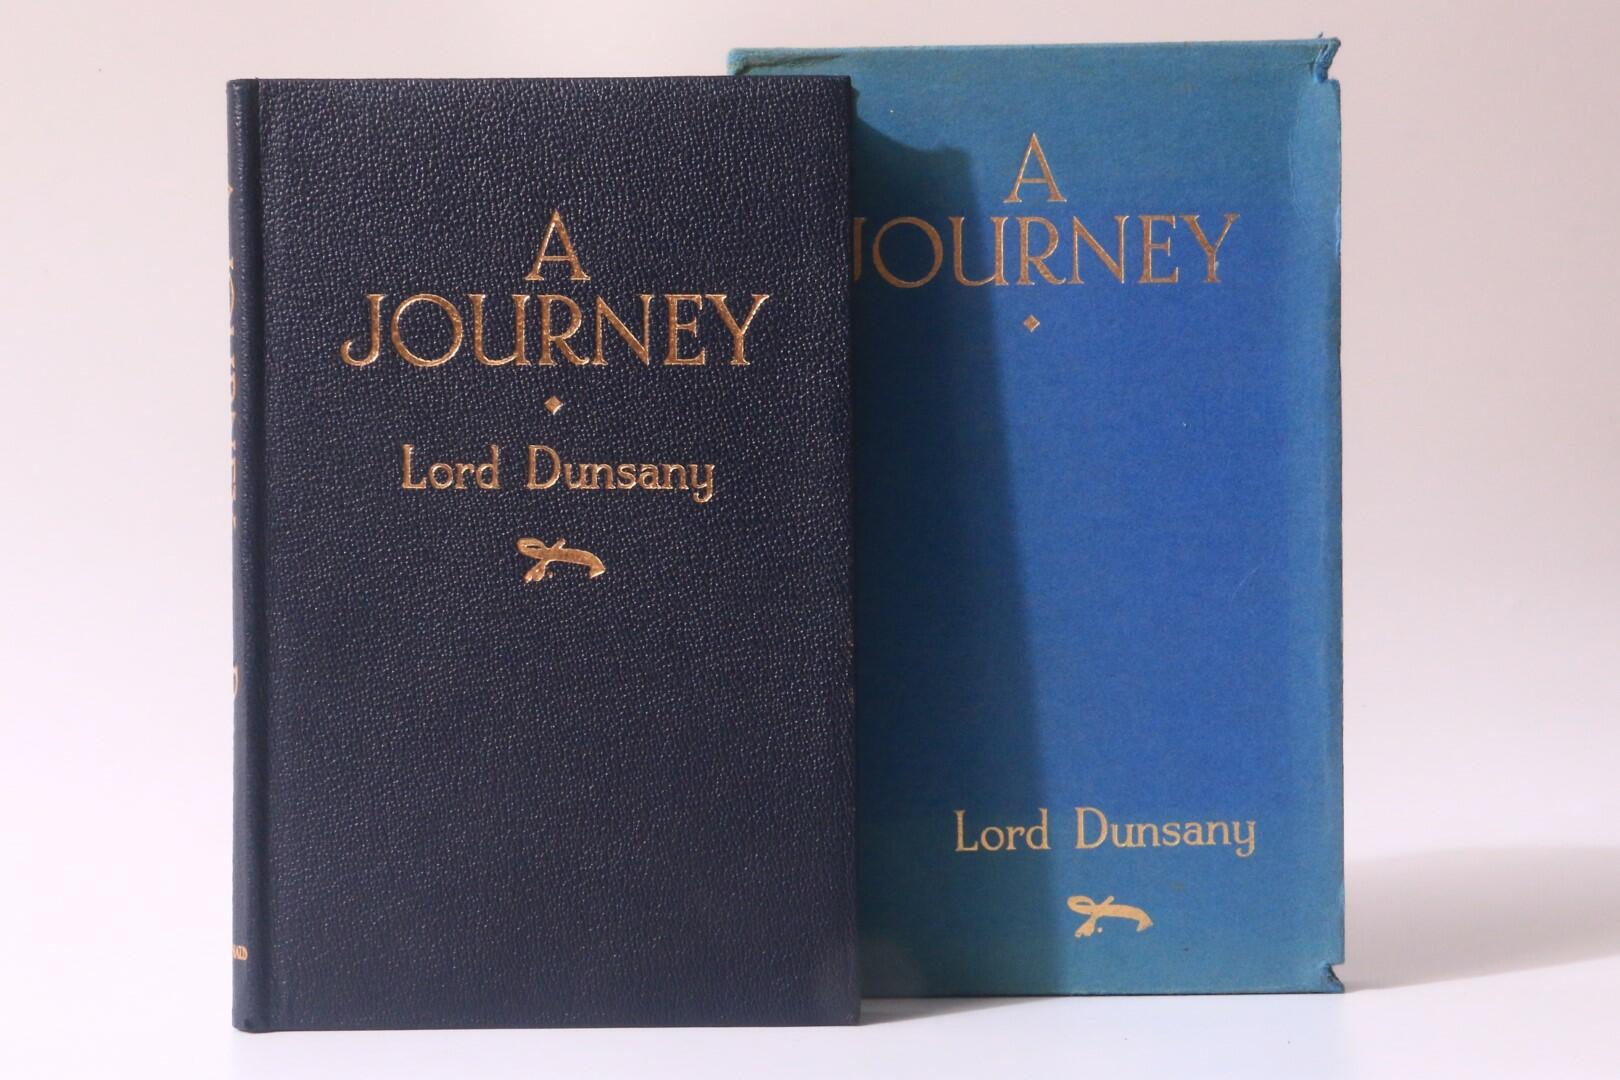 Lord Dunsany - A Journey - MacDonald, 1944, Signed Limited Edition.